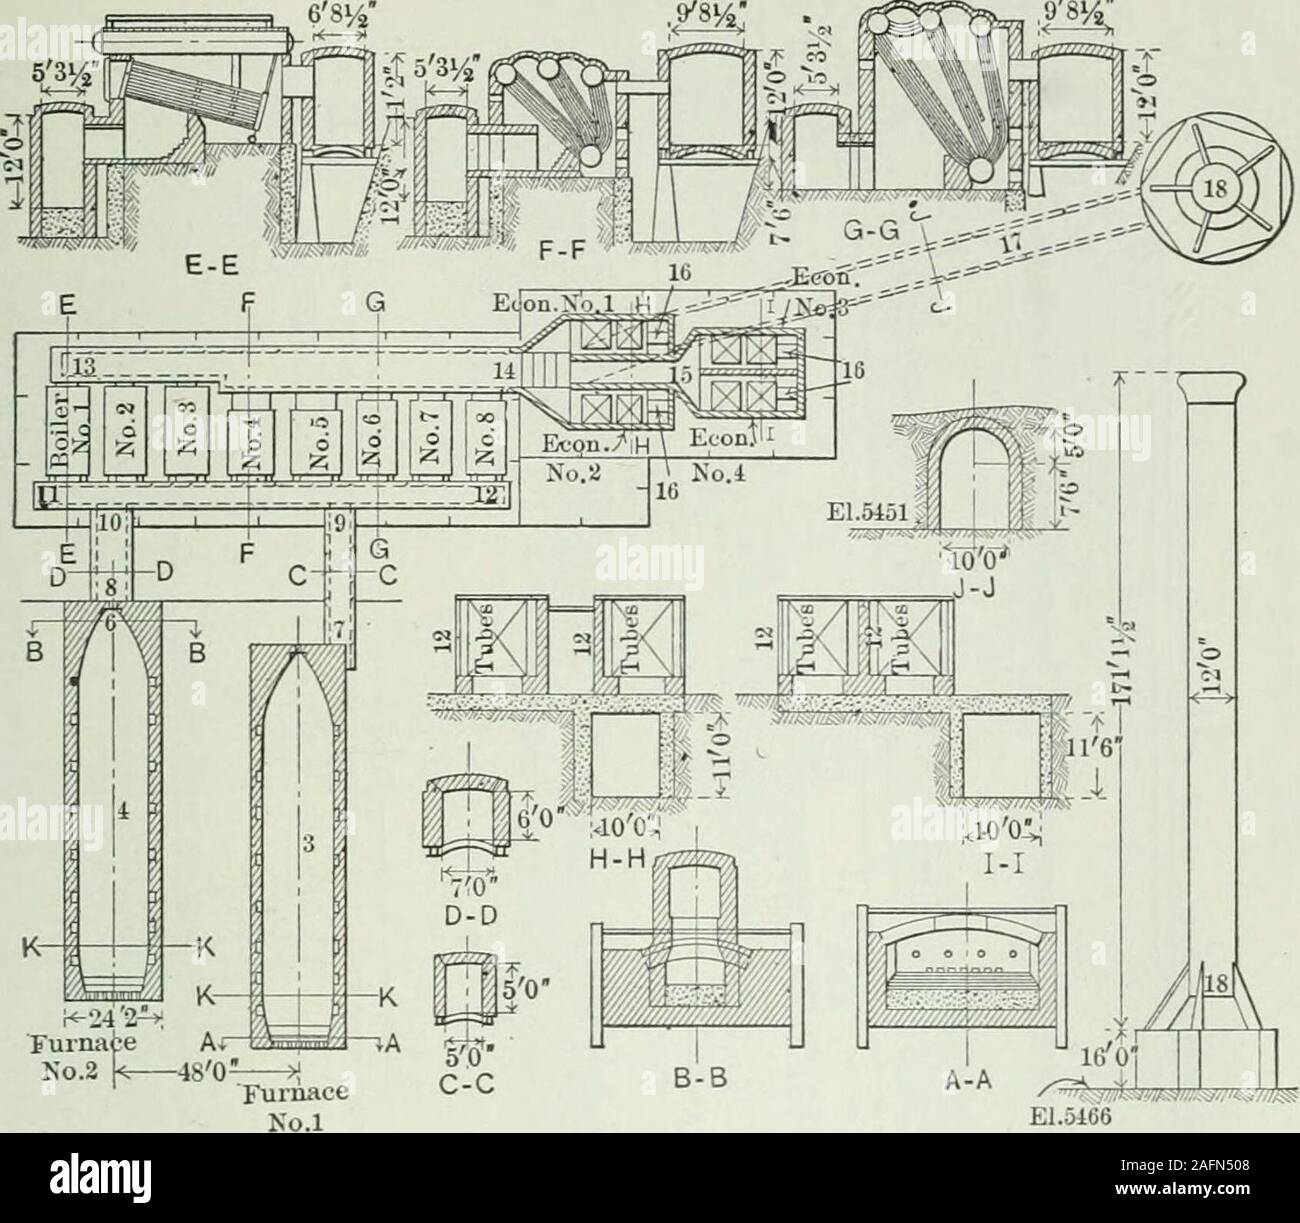 . Transactions. *? Fig. 5. -General Arrangement of Roaster and ReverberatoryPlant. Copper Queen Consolidated Mining Co. Silica brick is used almost exclusively in the constructionof the lining and roof of the modern reverberatory furnaces forcopper-smelting, and it is now possible to obtain silica brick, ofexcellent quality, all over the United States at reasonable cost. I desire here to thank the following gentlemen for valuabledata supplied : Dr. E. D. Peters, Dr. H. 0. Hofman, Dr. L. D.Ricketts, C. B. Lakenan, S. Severin Sorensen, George B. Lee,William H. Howard, A. E. AVheeler, William Wra Stock Photo